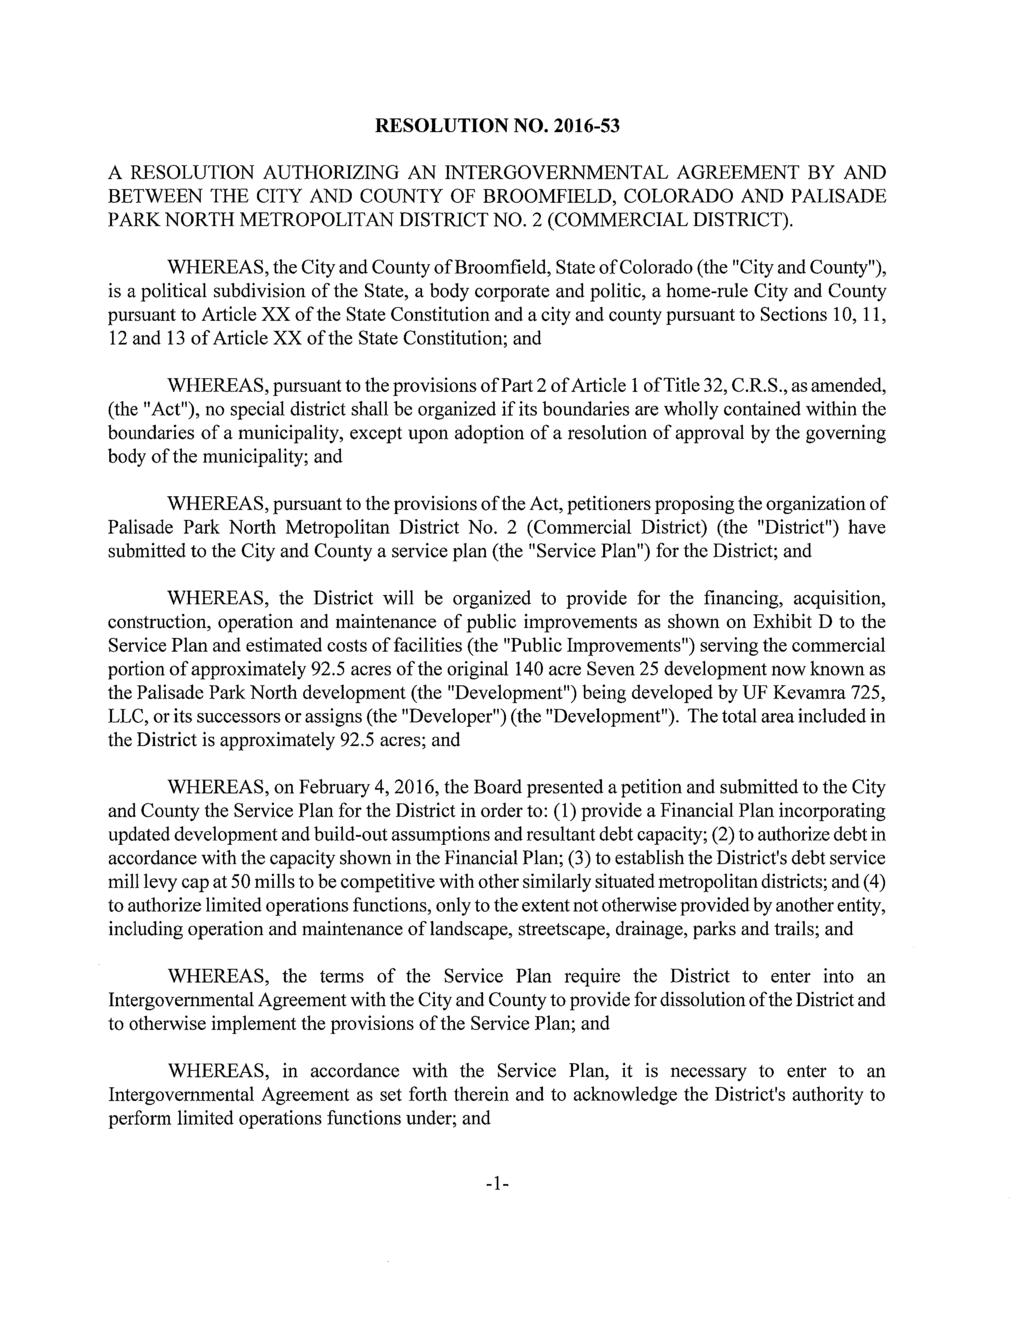 RESOLUTION NO. 2016-53 A RESOLUTION AUTHORIZING AN INTERGOVERNMENTAL AGREEMENT BY AND BETWEEN THE CITY AND COUNTY OF BROOMFIELD, COLORADO AND PALISADE PARK NORTH METROPOLITAN DISTRICT NO.